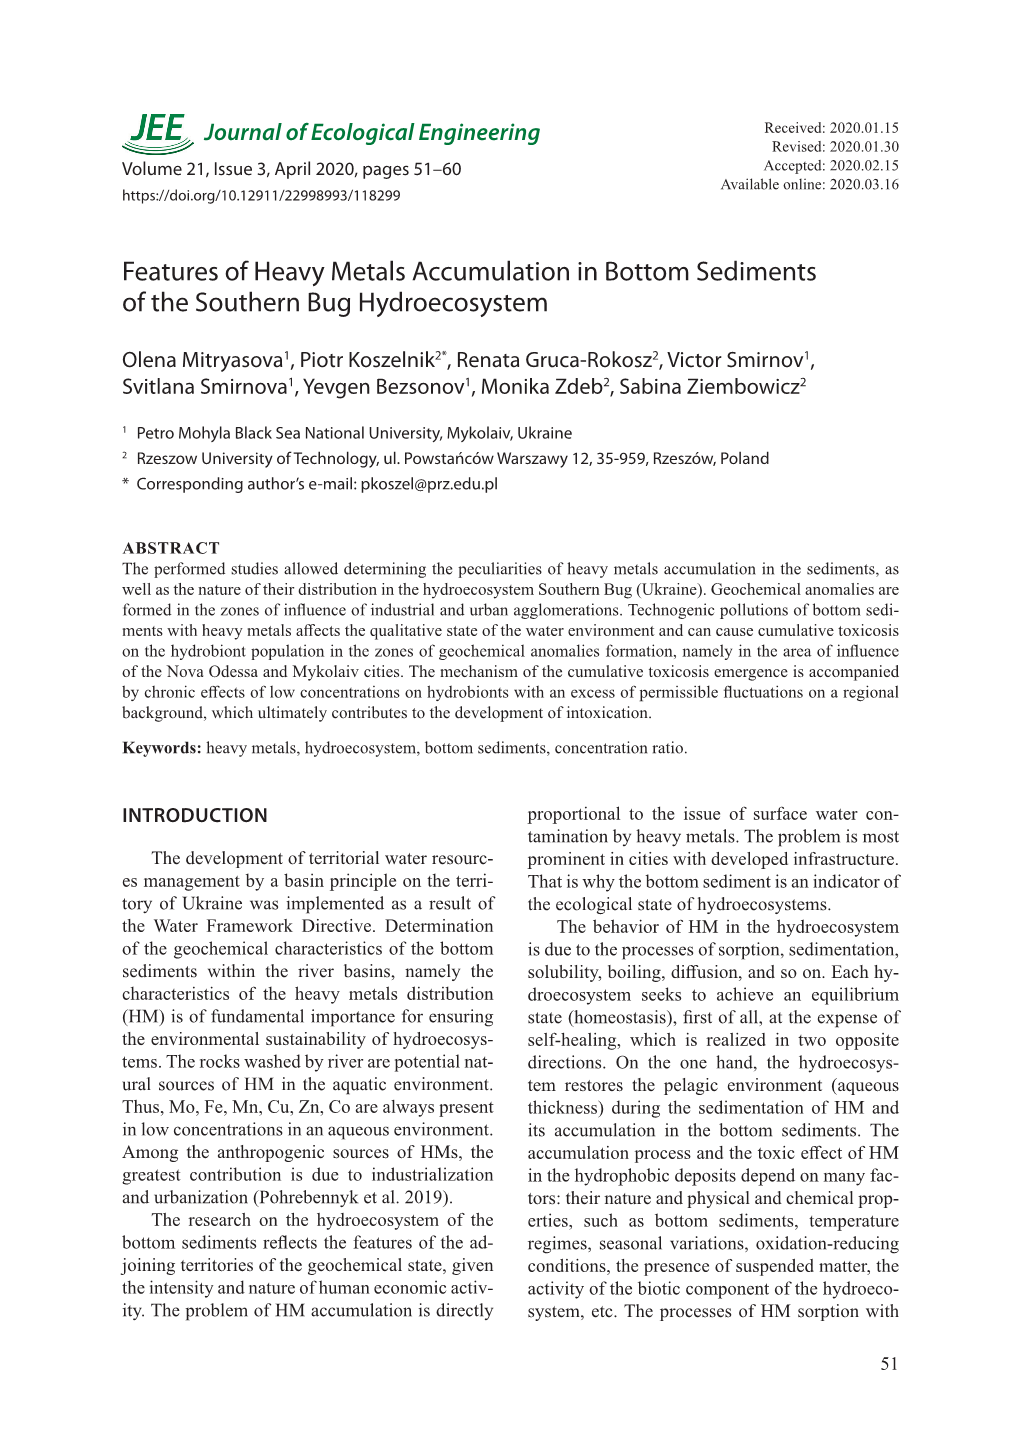 Features of Heavy Metals Accumulation in Bottom Sediments of the Southern Bug Hydroecosystem